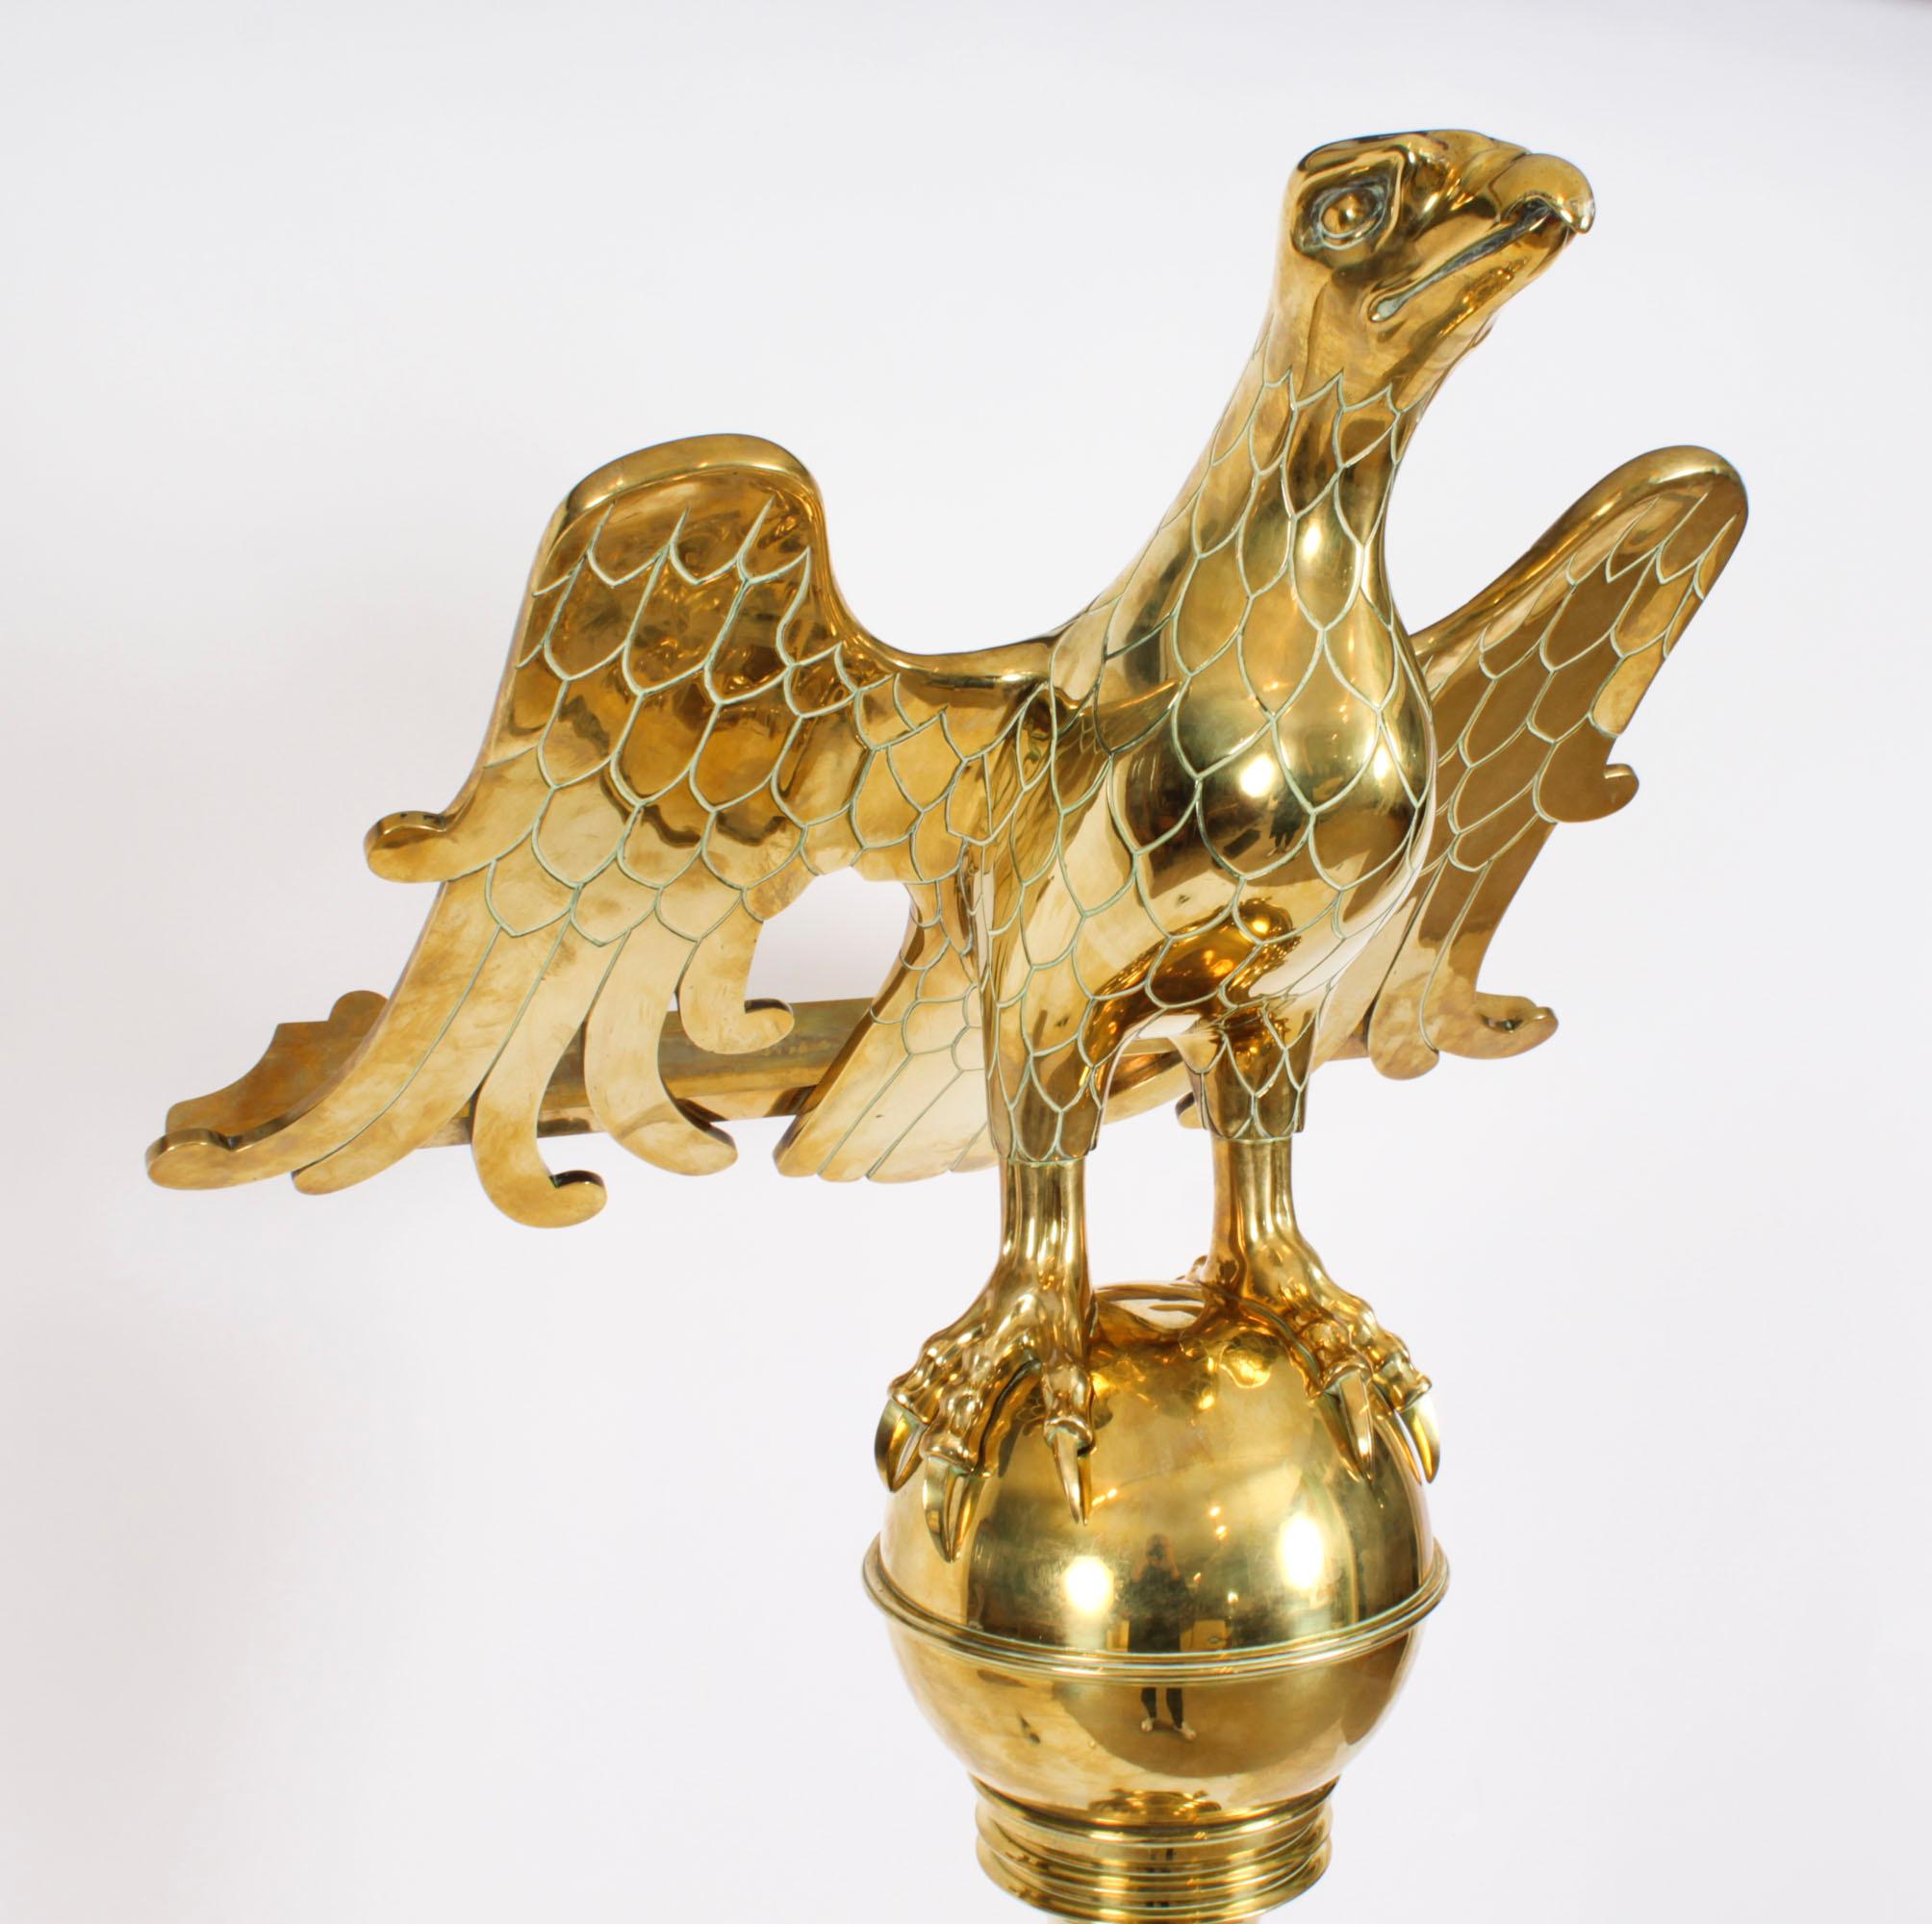 This is an impressive antique brass Victorian  eagle lectern, circa 1890 in date.

The 5ft6inch (164cm) lectern features an eagle with wings outstretched and detailed feathers to form the book rest,  on a ball surmounting a knopped column.

The